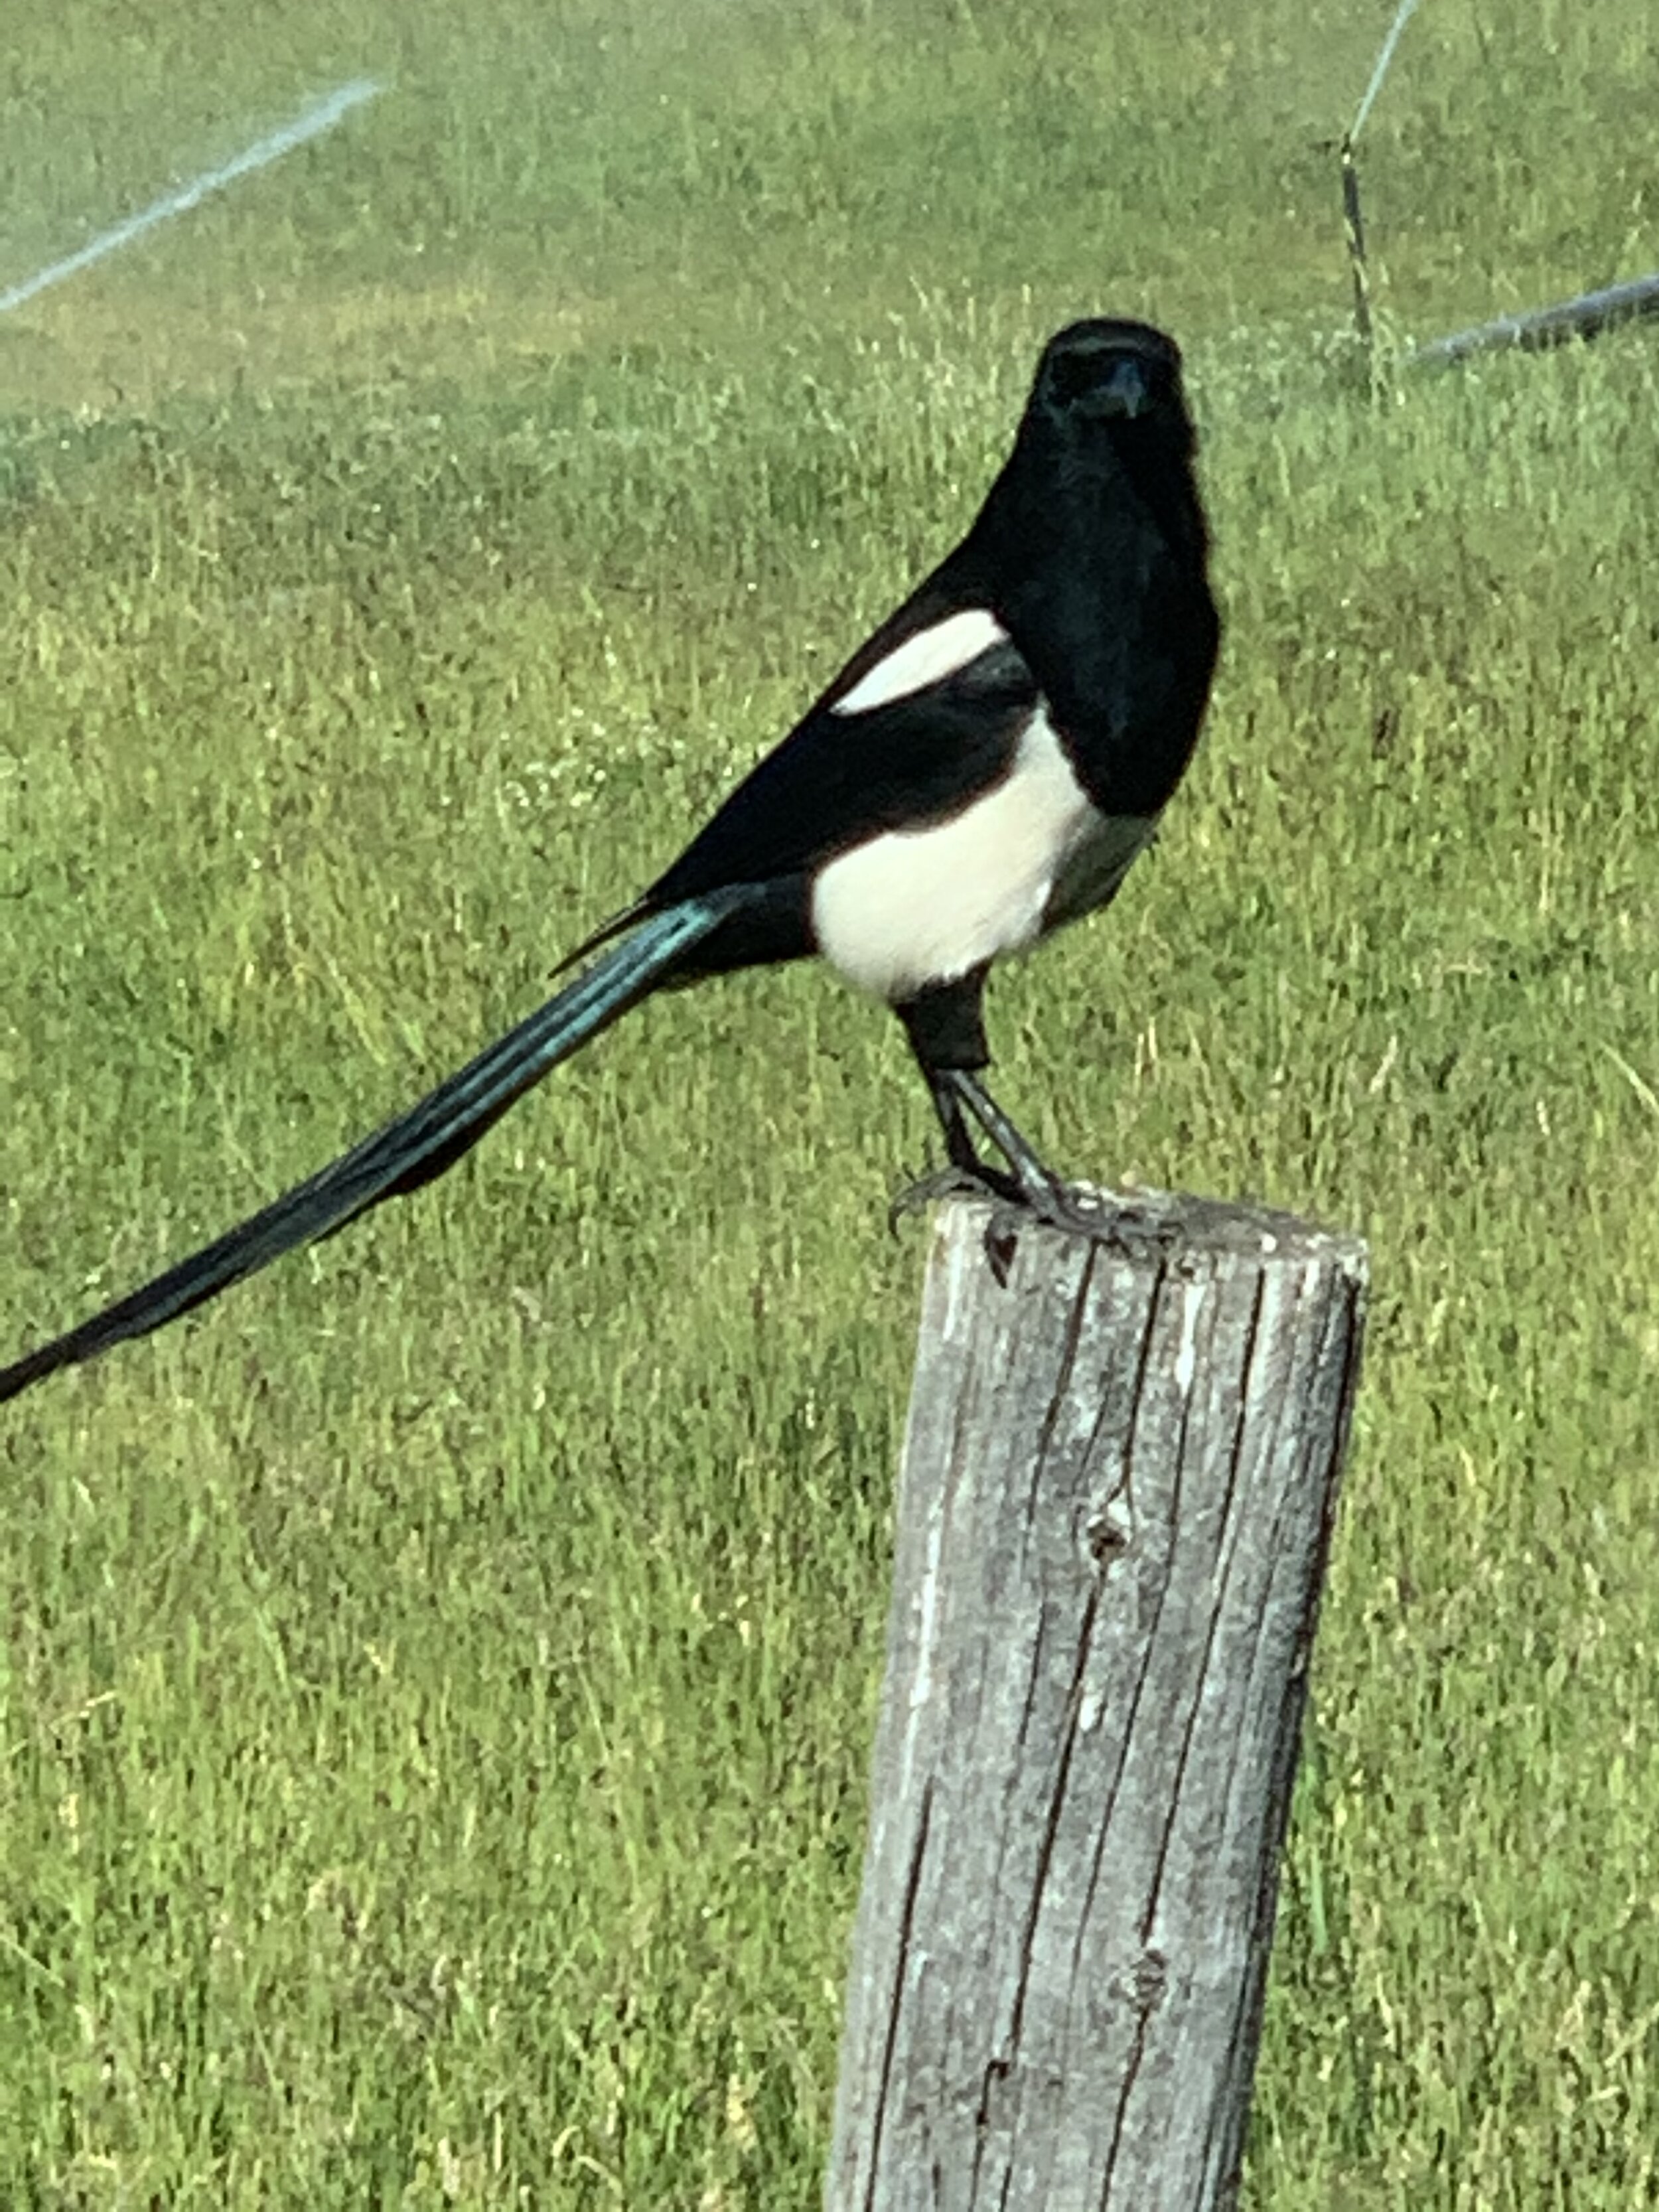  Magpies were all around our camper in Ashton. The magpie is considered one of the most intelligent animals in the world and one of only a few non-mammal species able to recognize itself in a mirror! They’re also very territorial and do not think twi